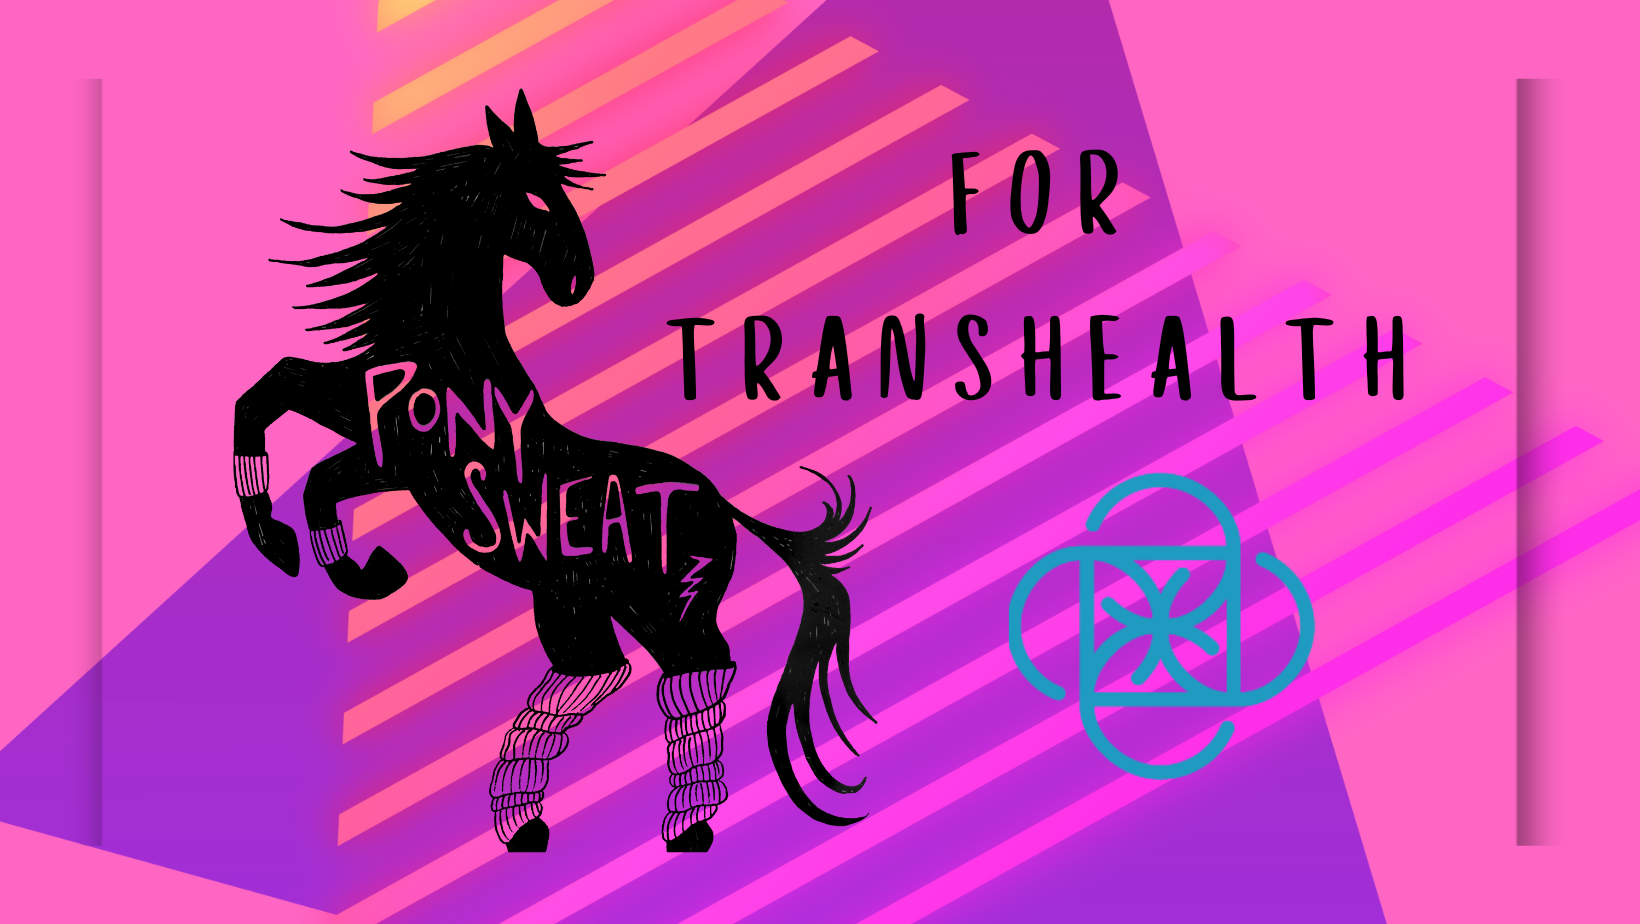 Pony Sweat for Transhealth. Black Pony with neon pink, purple and yellow background.